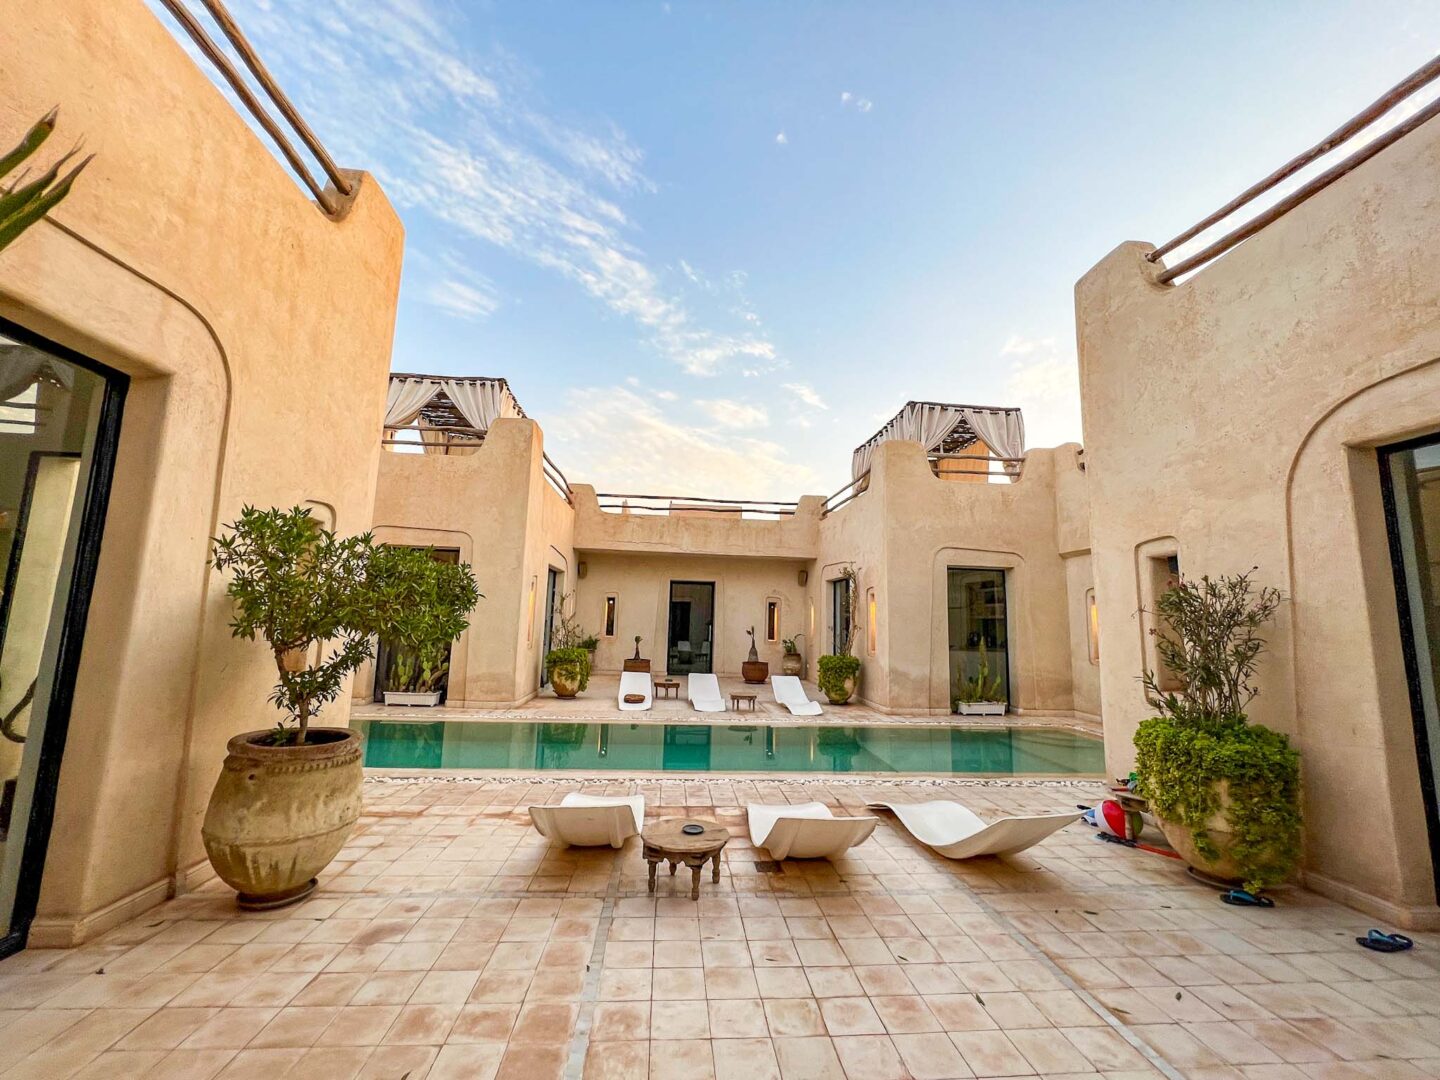 villa in Marrakech with pool and sunloungers